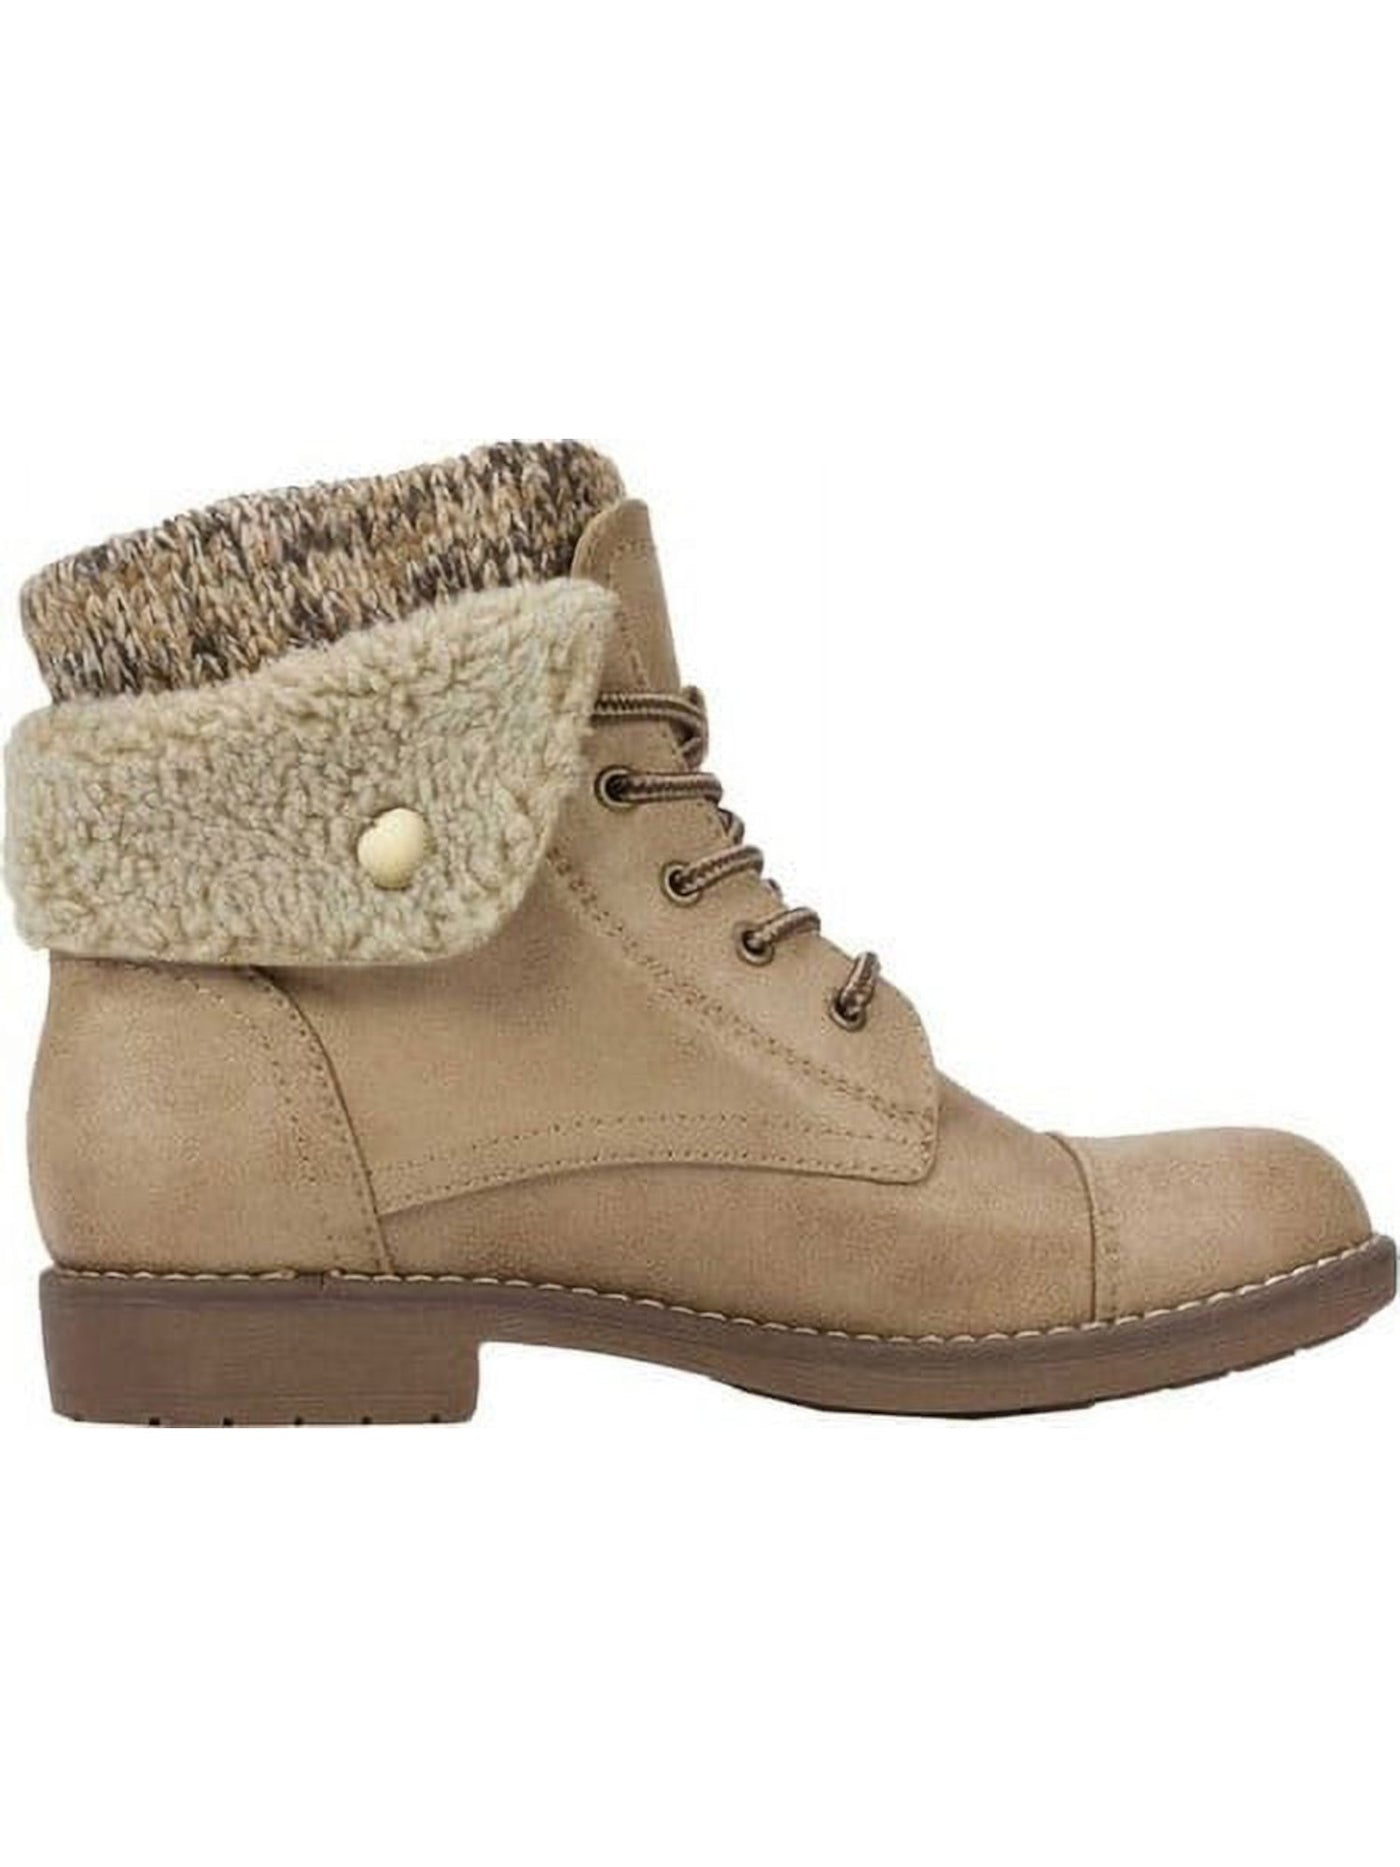 CLIFFS BY WHITE MOUNTAIN Womens Beige Sweater Ankle Trim Snap Collar Padded Duena Round Toe Block Heel Lace-Up Hiking Boots 10 W